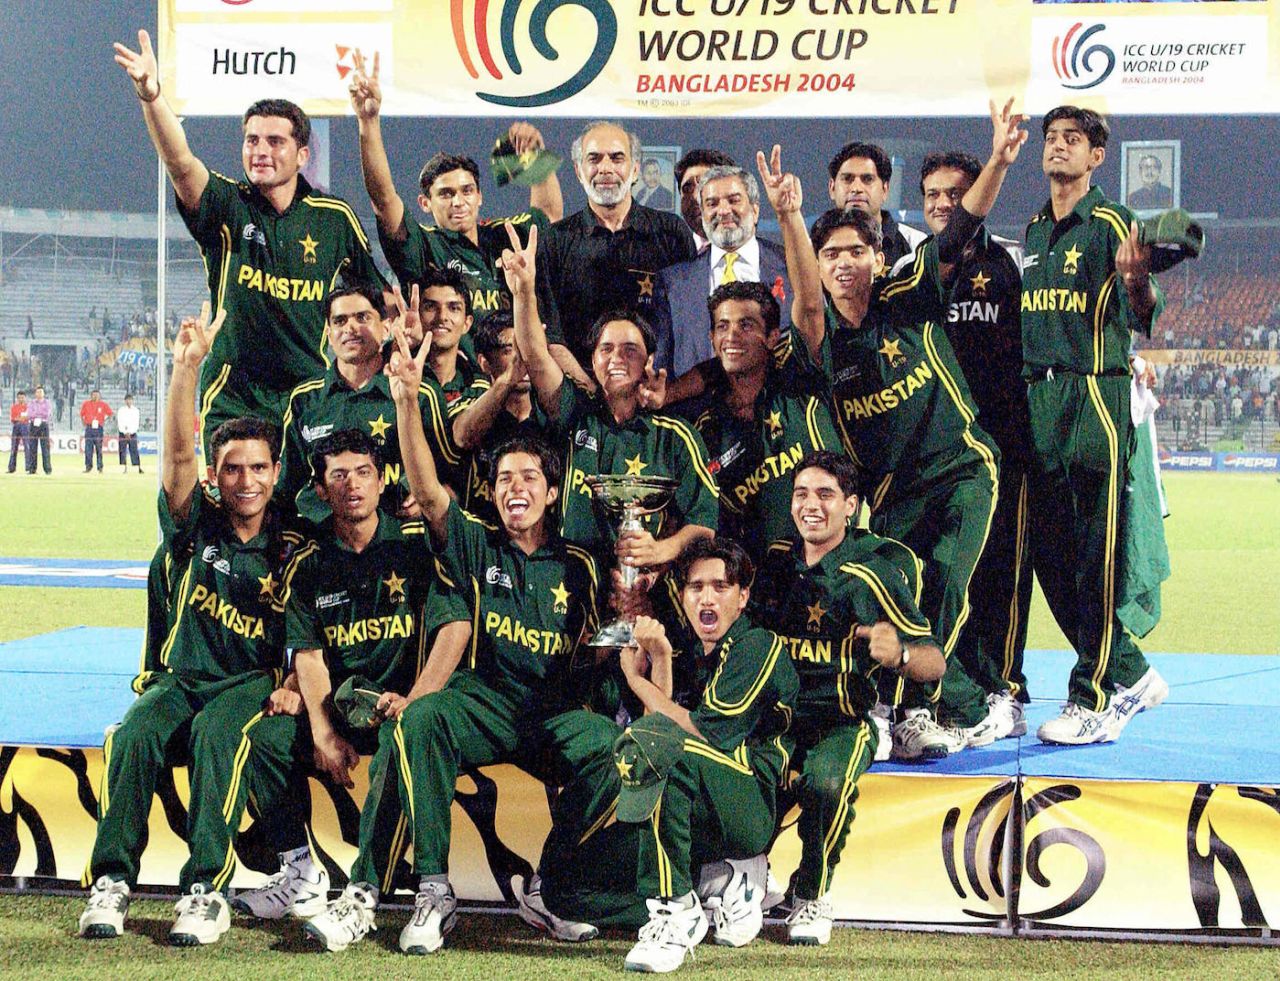 The Pakistan players pose with the Under-19 World Cup trophy, Dhaka, March 5, 2004